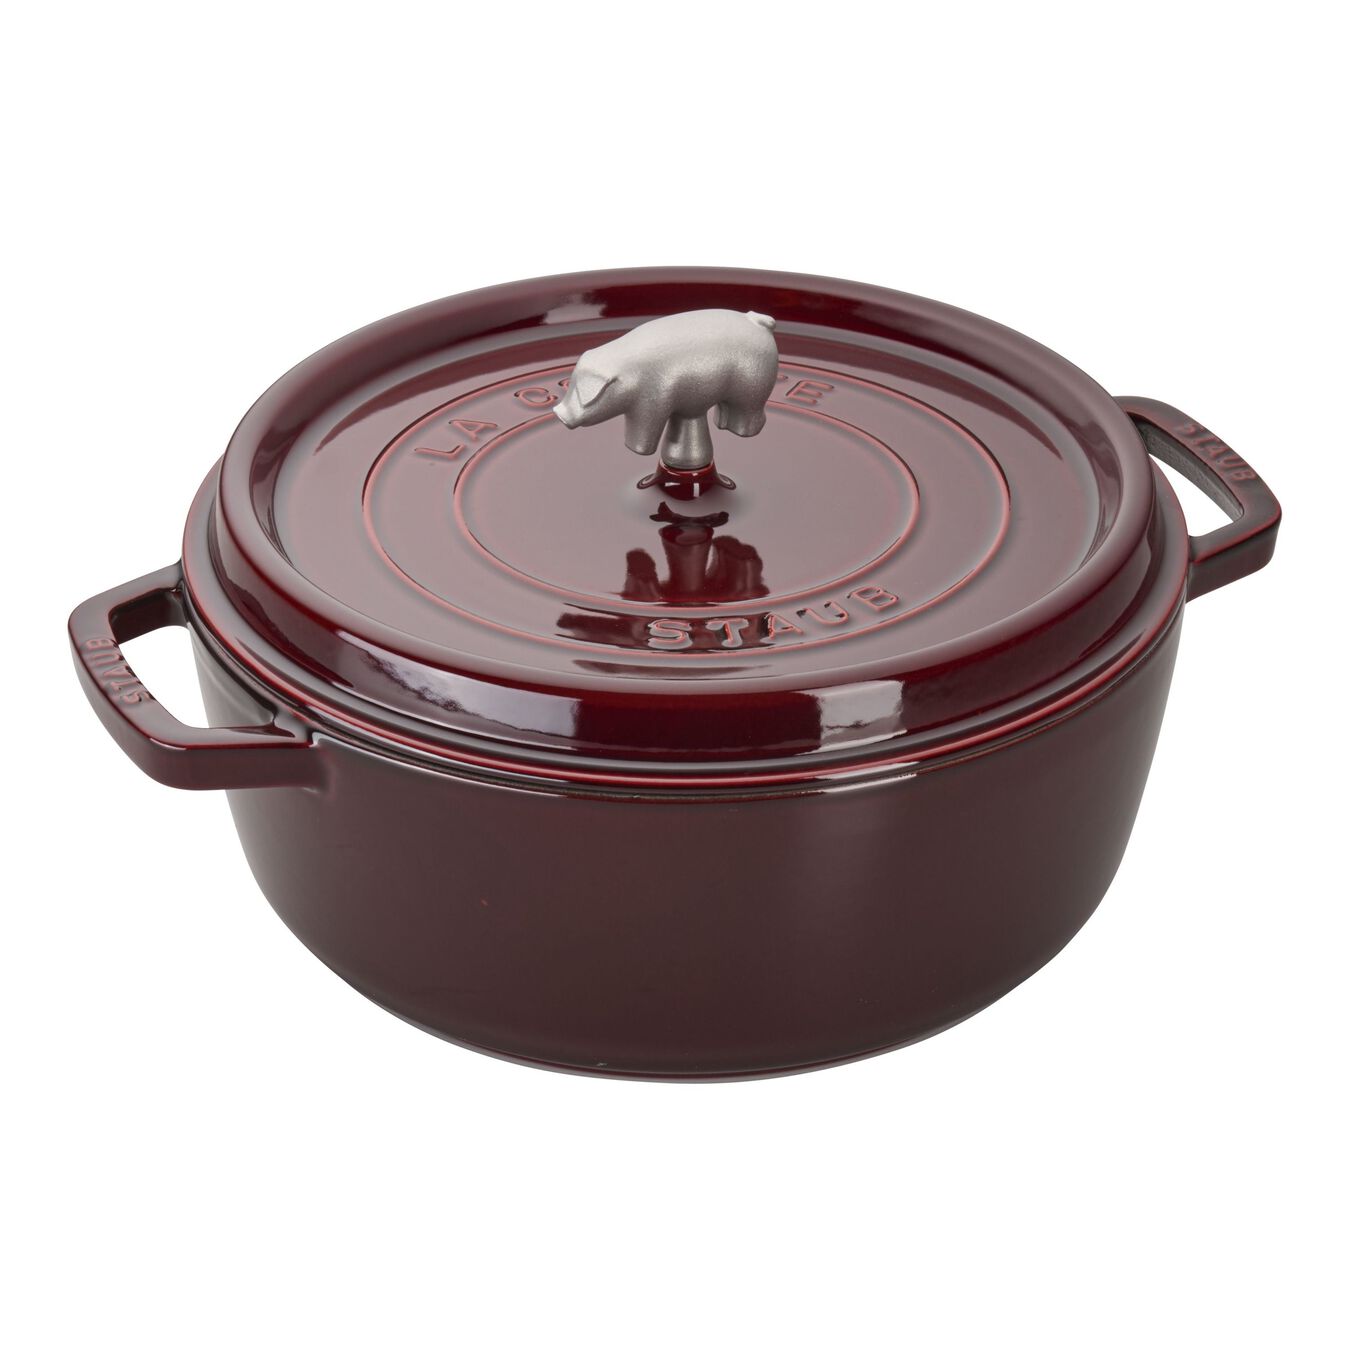 5.7 l cast iron pig Cocotte, grenadine-red - Visual Imperfections,,large 1